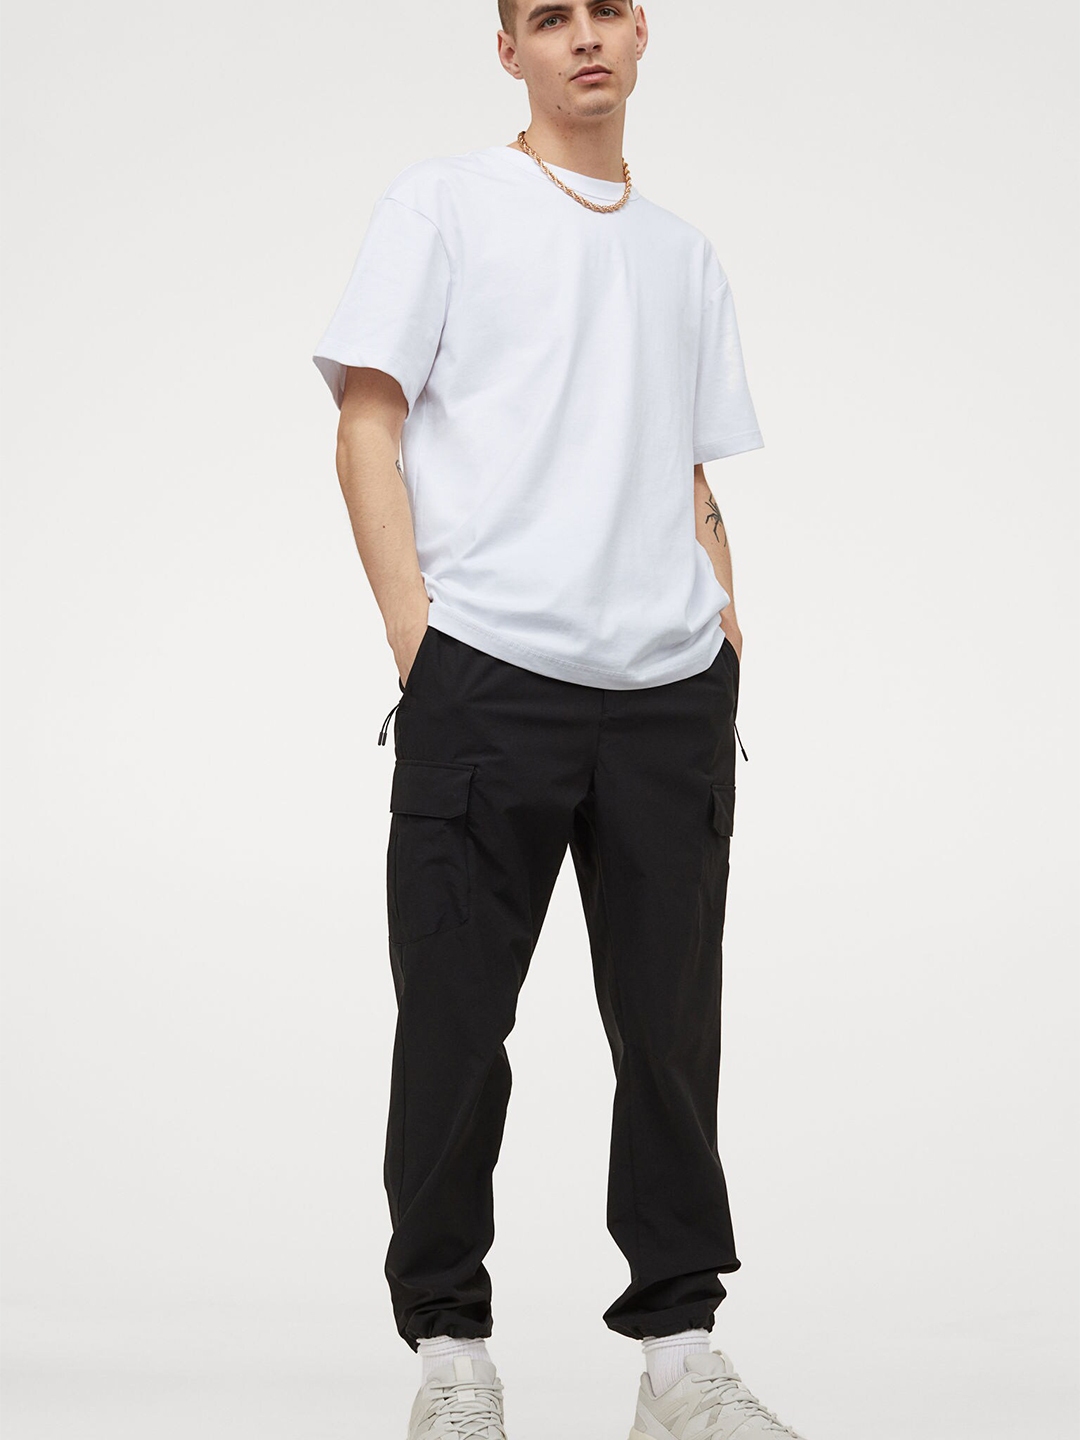 H&M Men White Solid COOLMAX Relaxed Fit T-shirt